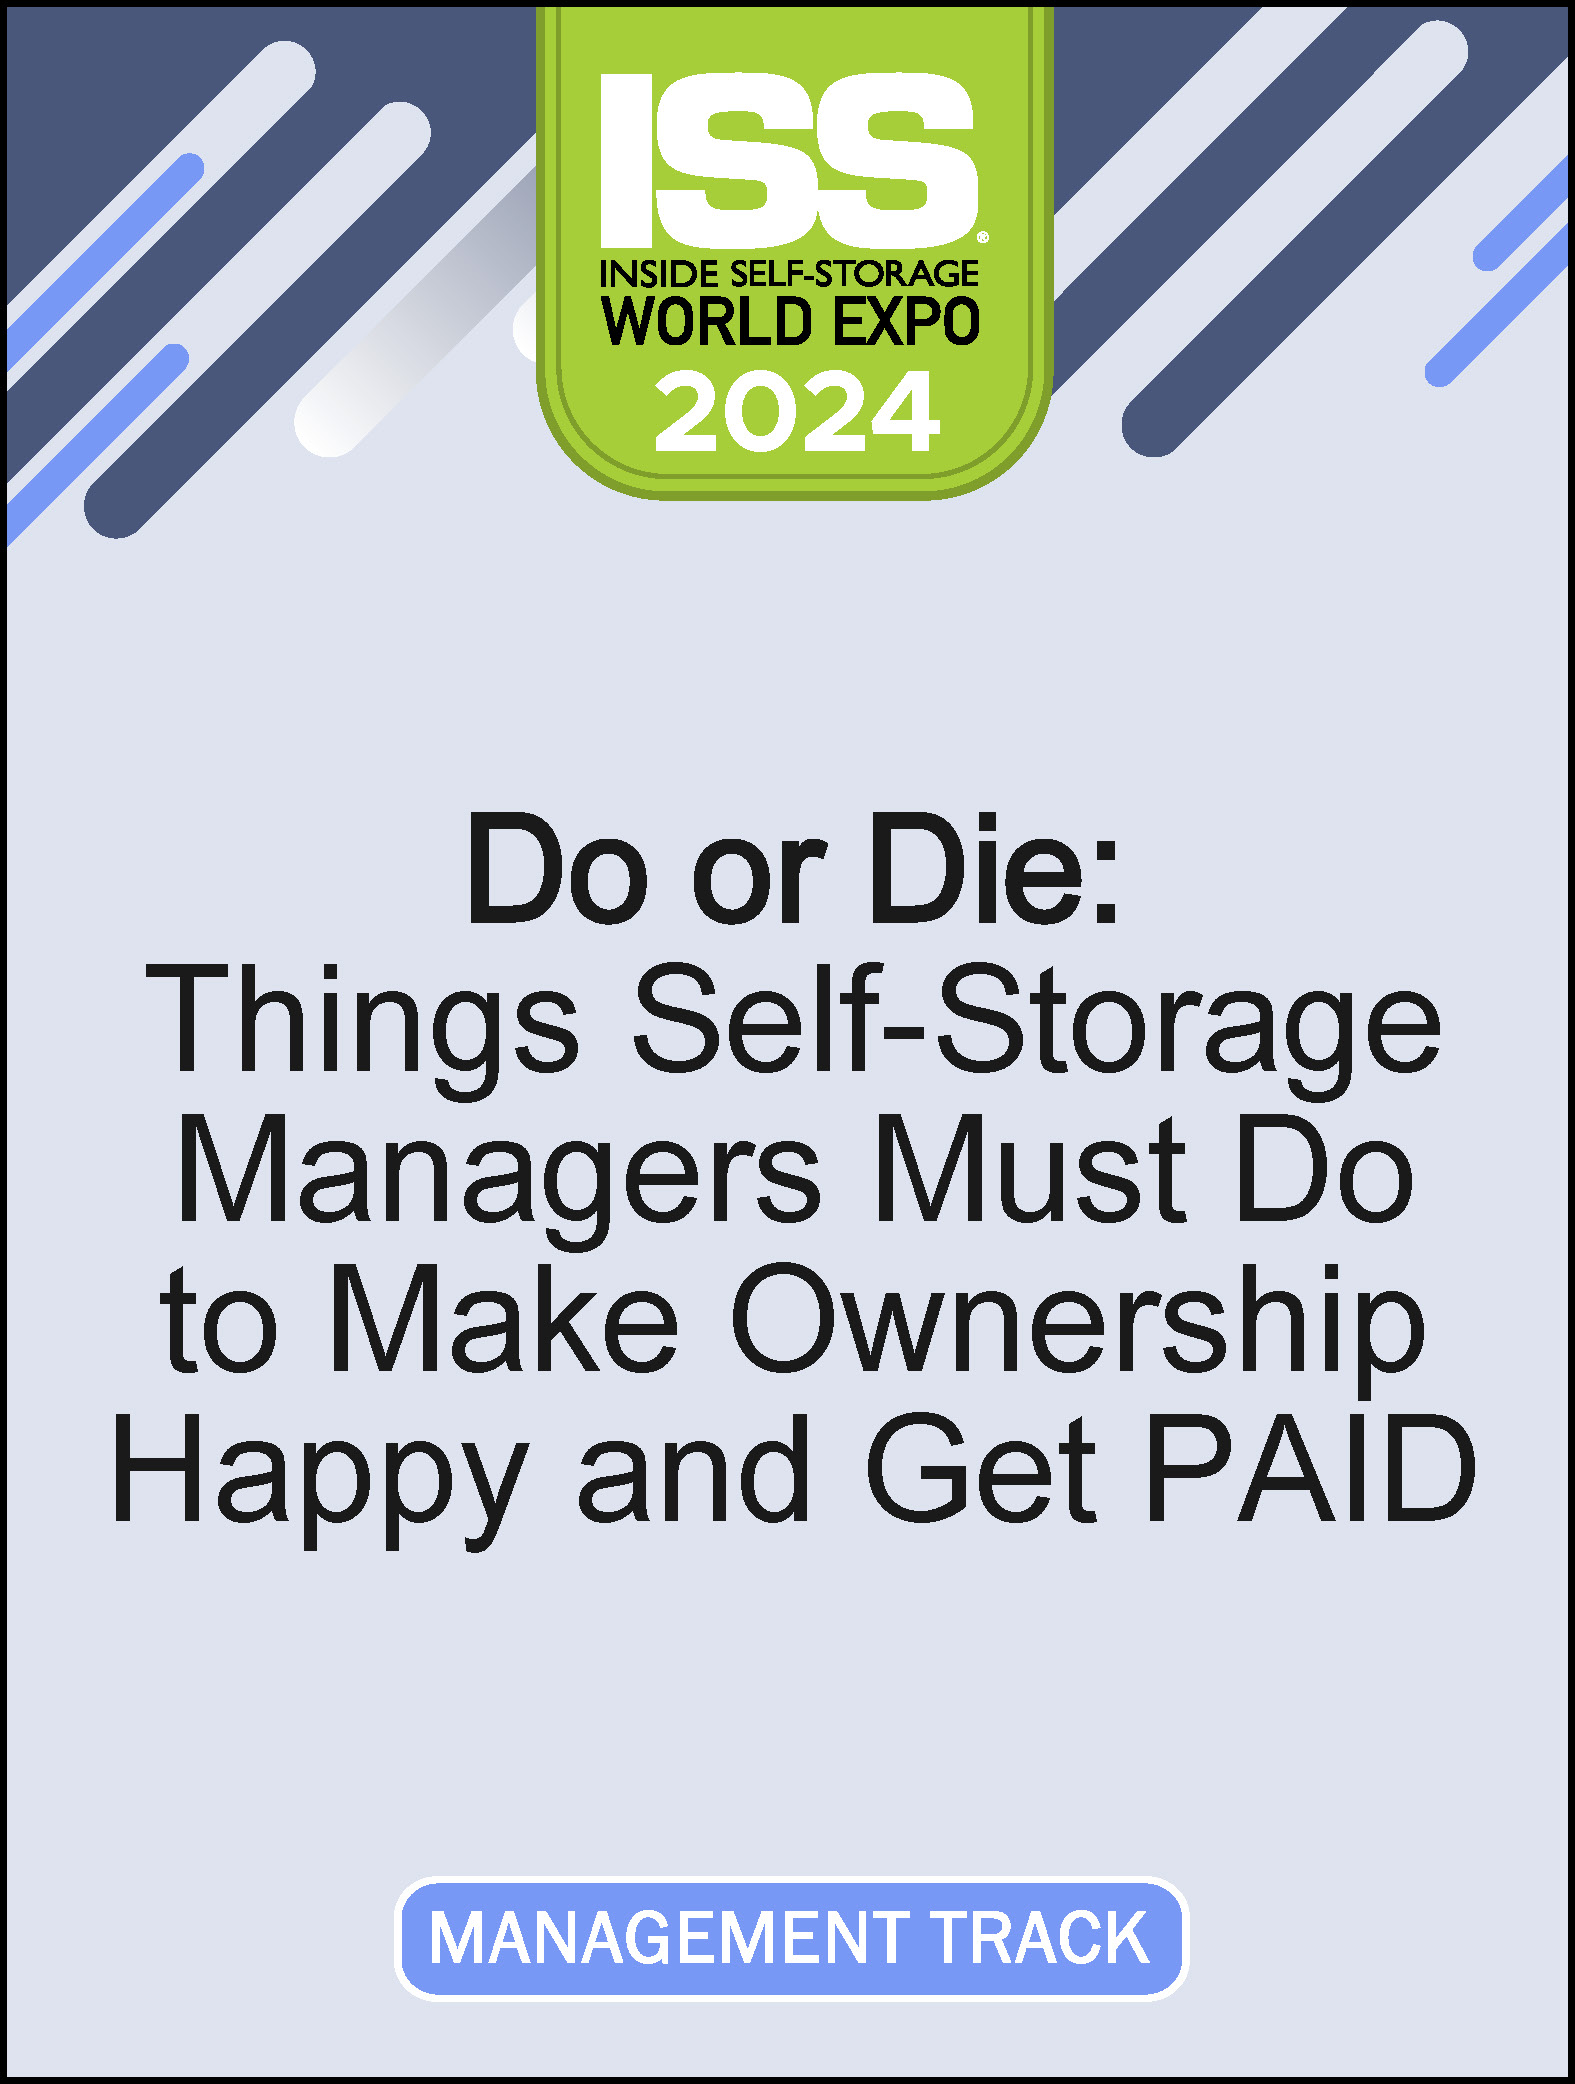 Video Pre-Order PDF - Do or Die: Things Self-Storage Managers Must Do to Make Ownership Happy and Get PAID